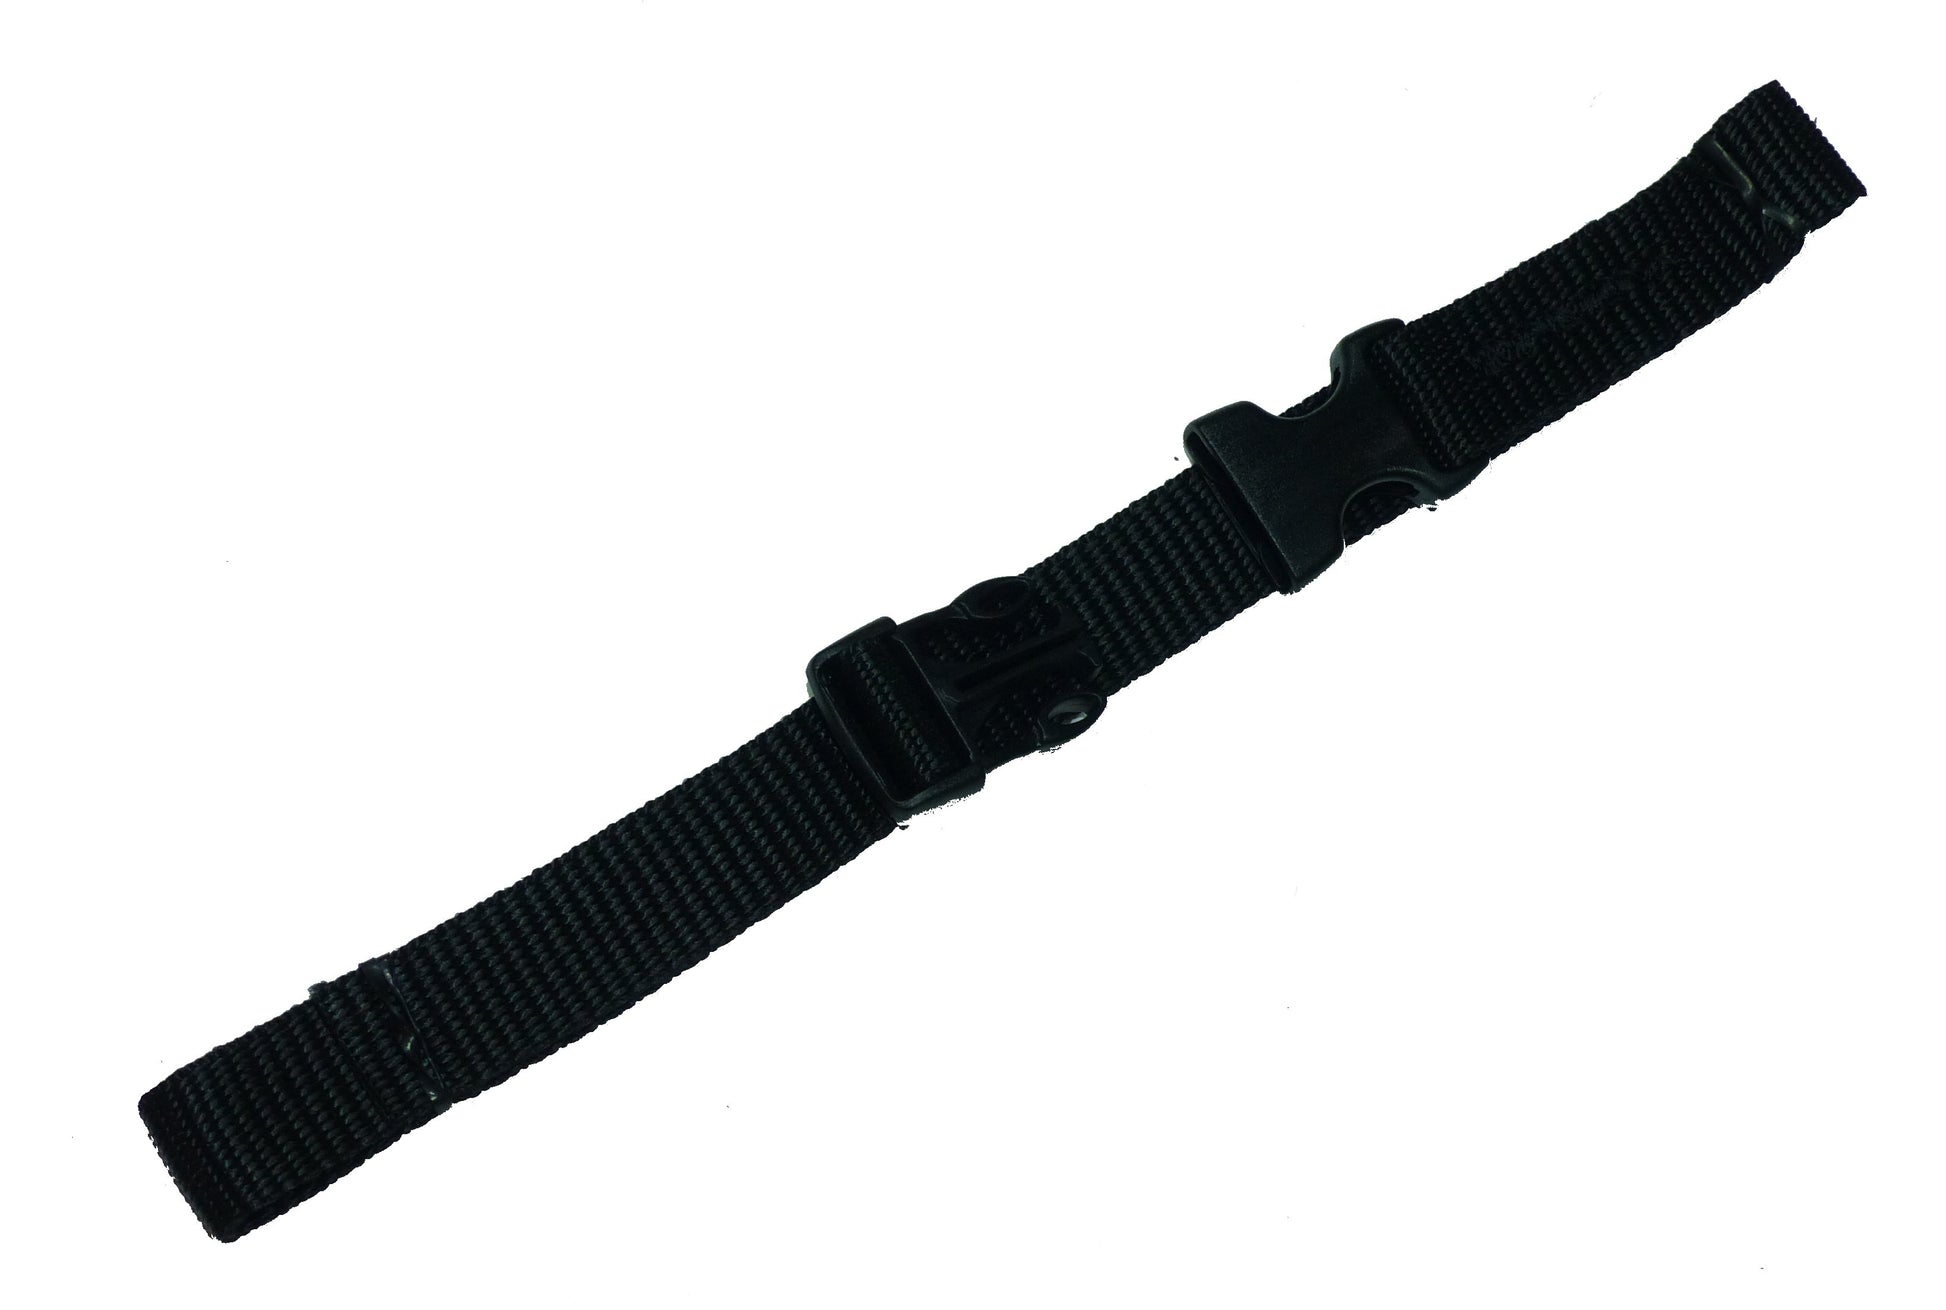 Benristraps 19mm Webbing Strap with Quick Release Buckle (Pair) (2)